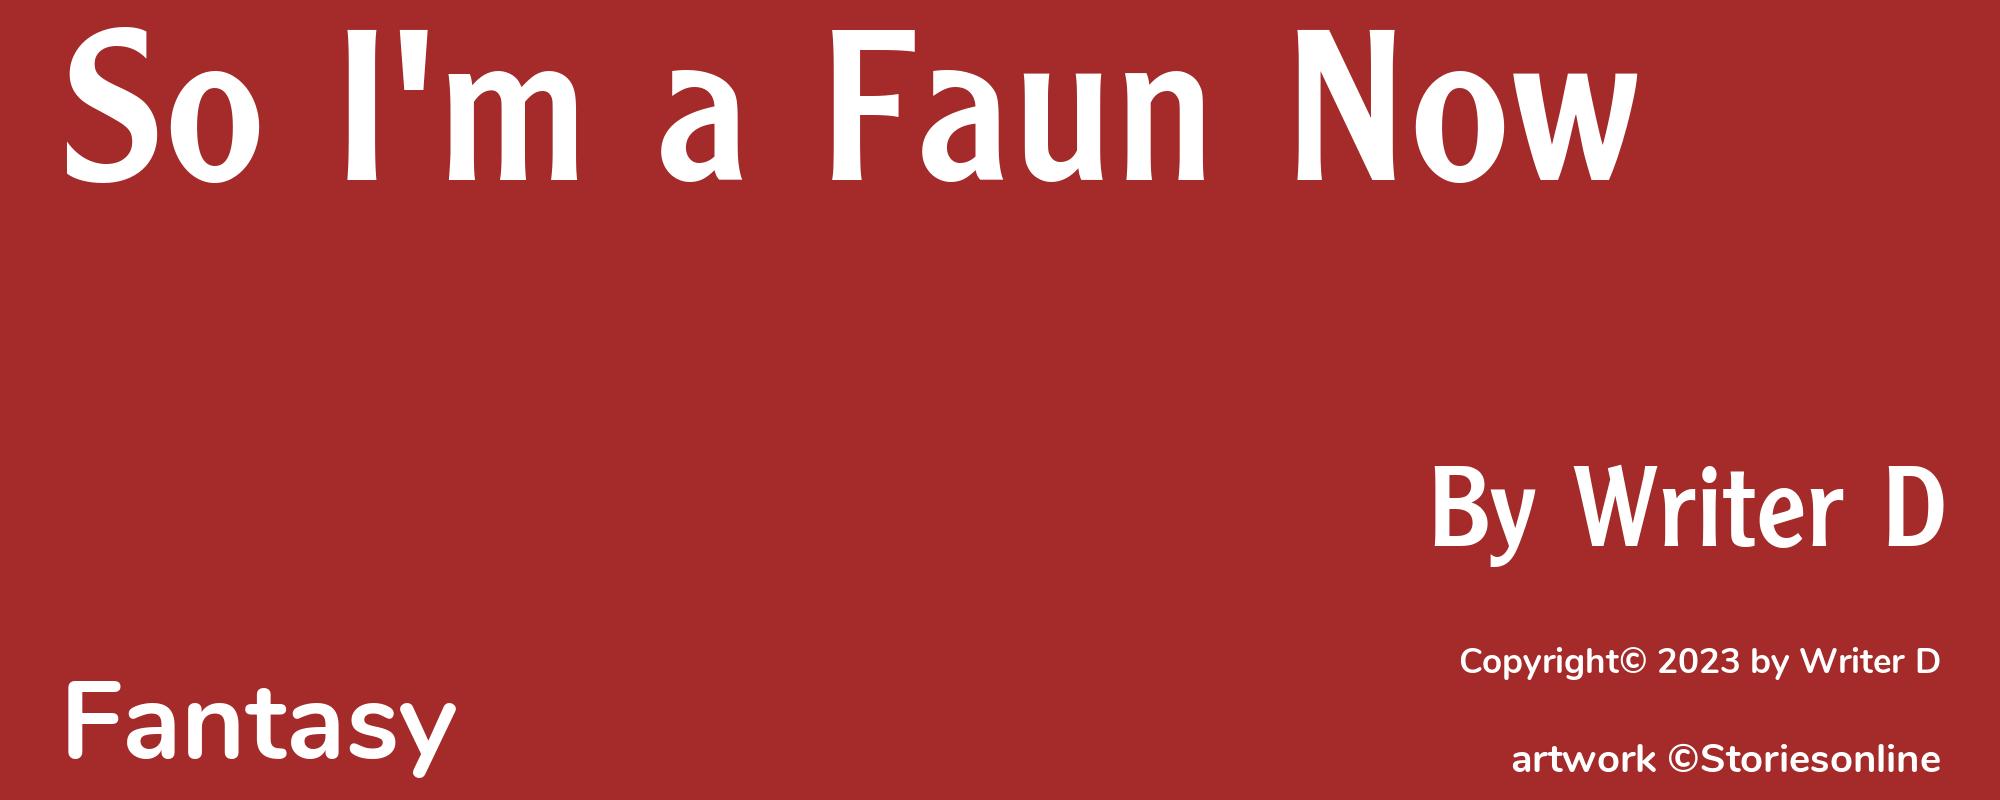 So I'm a Faun Now - Cover